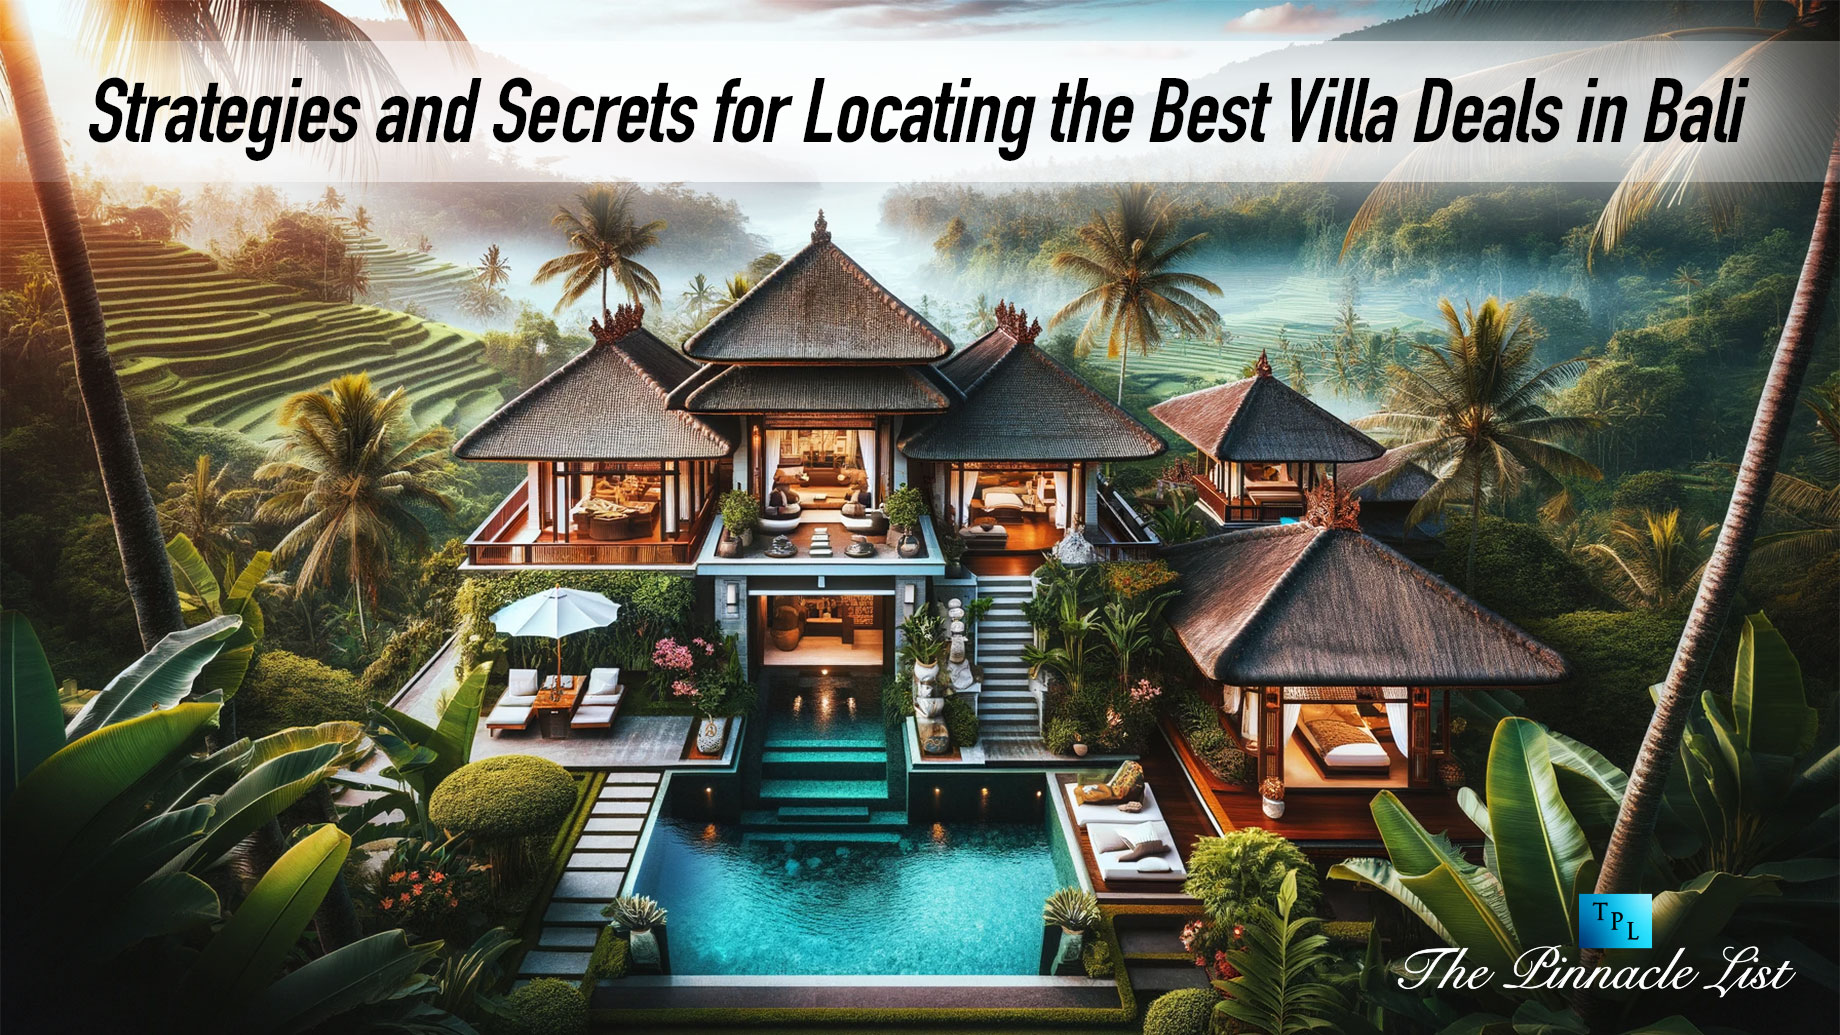 Insider's View: Strategies and Secrets for Locating the Best Villa Deals in Bali